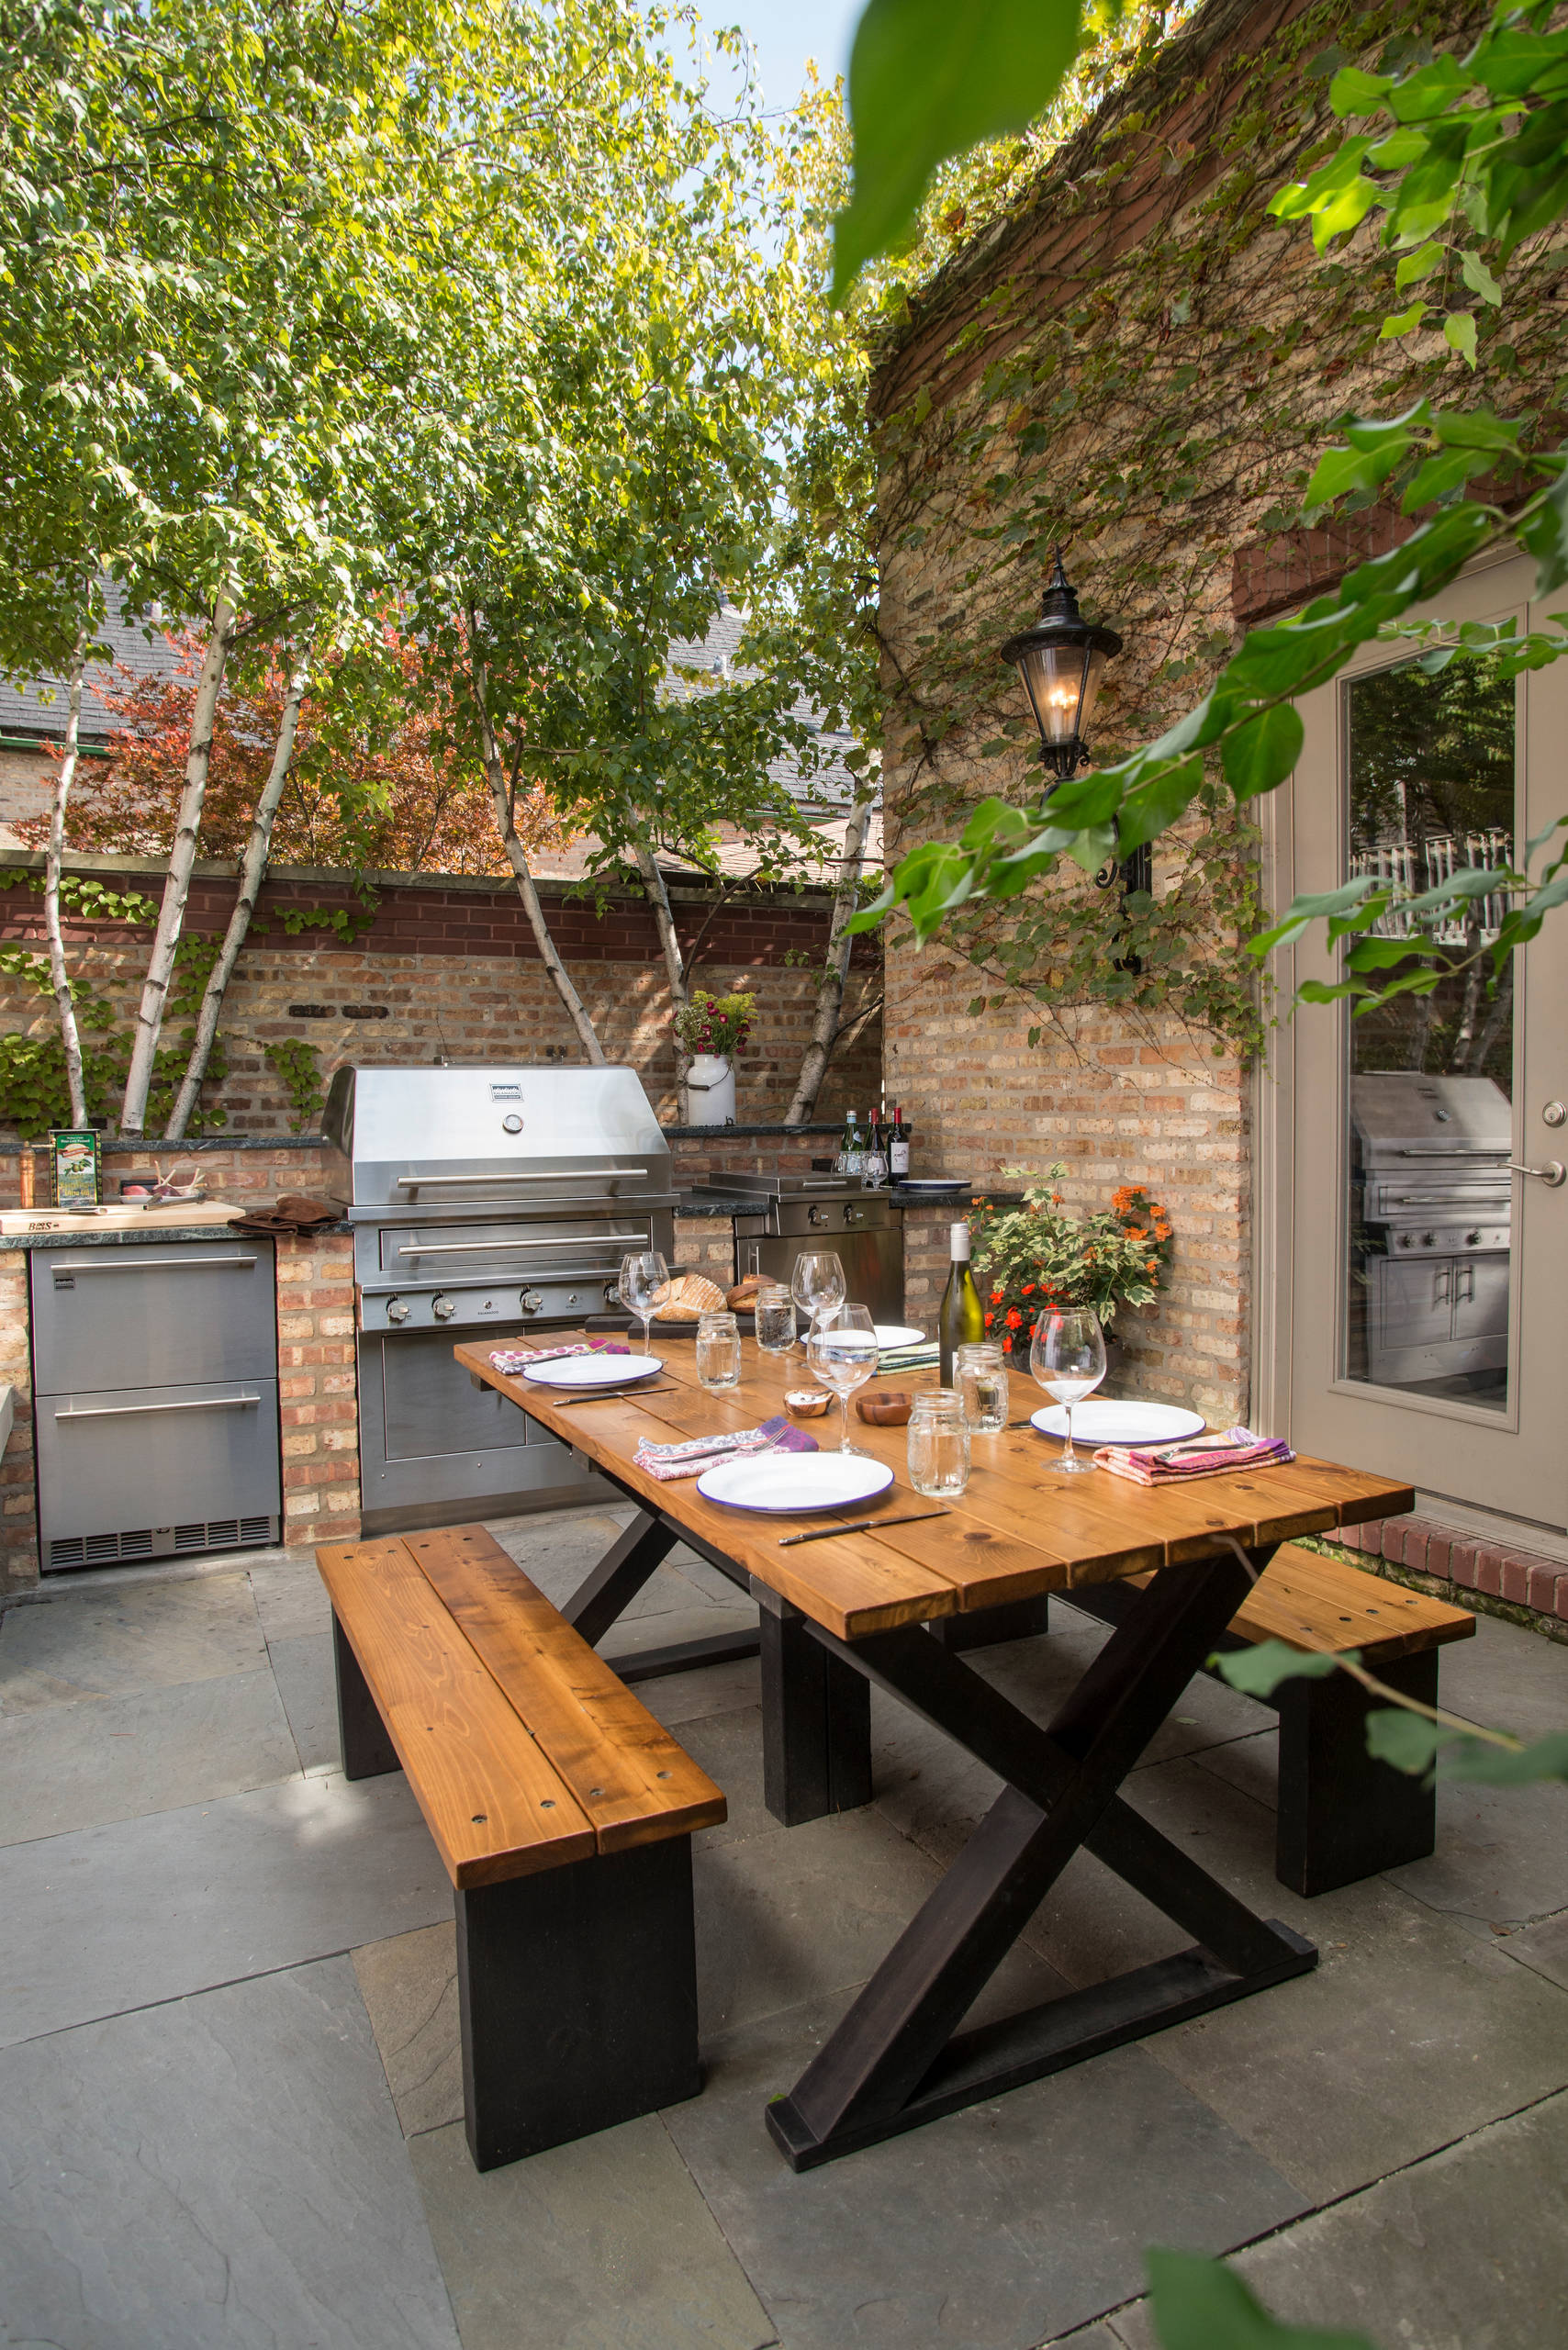 https://st.hzcdn.com/simgs/pictures/patios/downtown-chicago-outdoor-kitchen-kalamazoo-outdoor-gourmet-img~2051e195058ae21a_14-0562-1-d8f1004.jpg